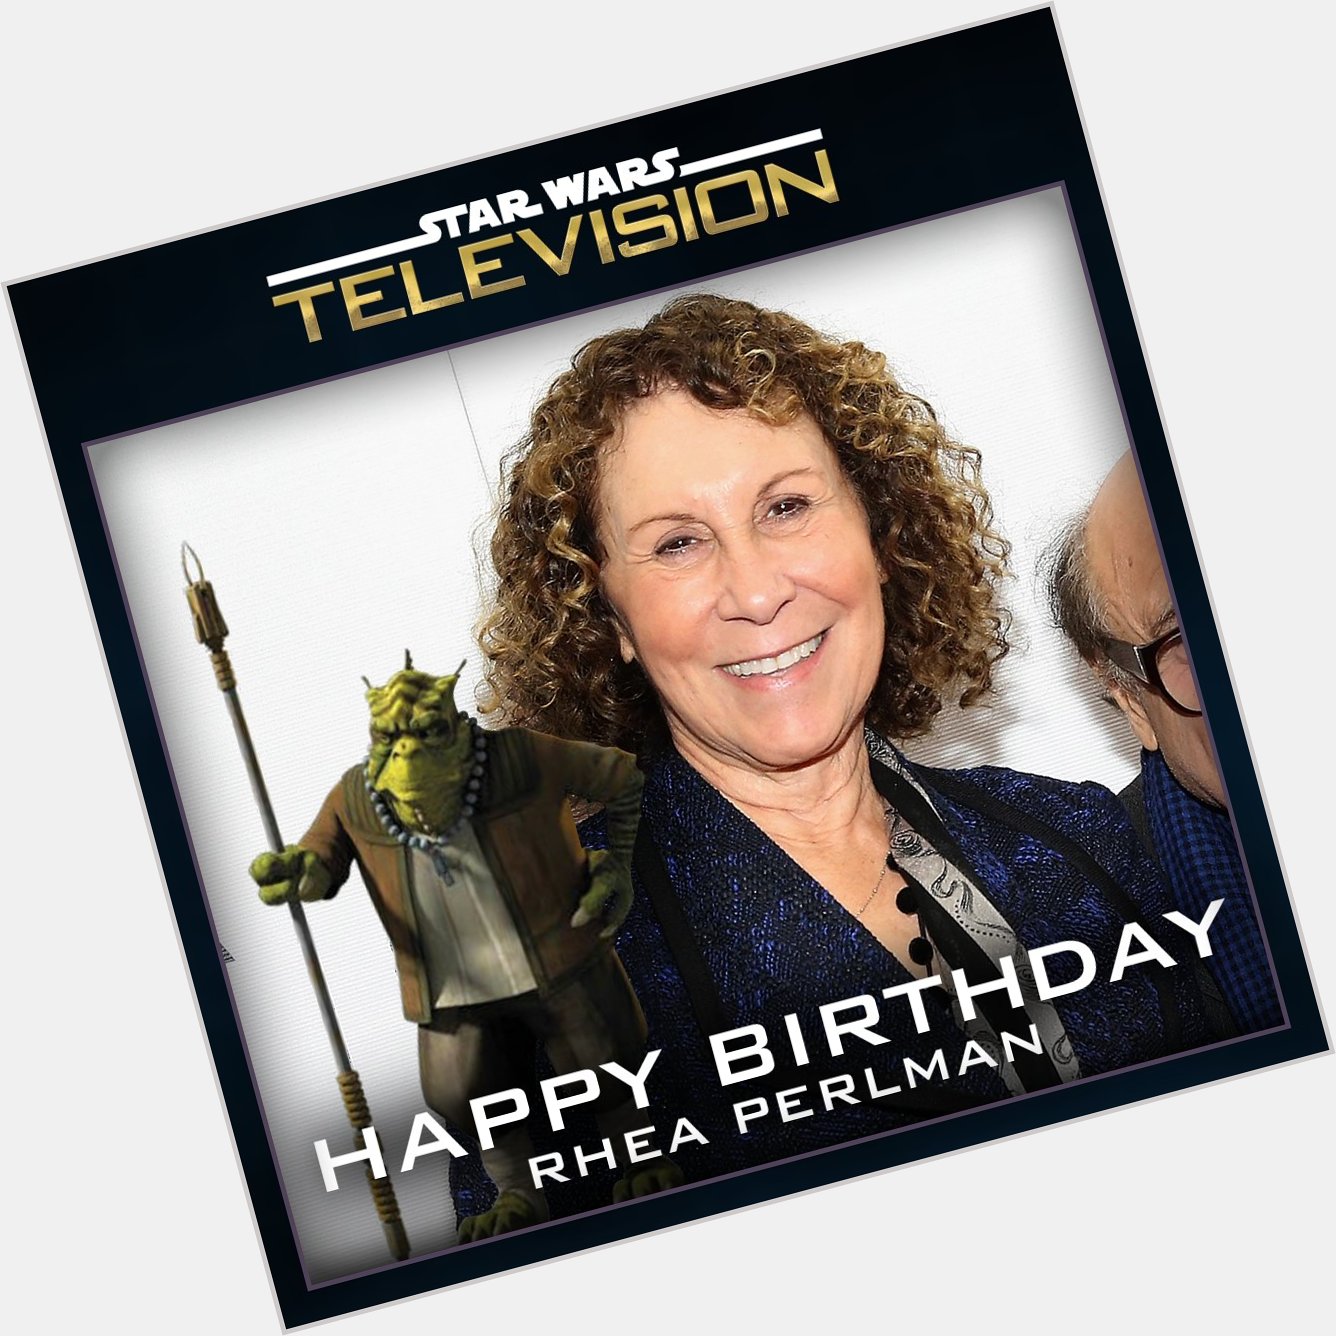 Happy birthday to Rhea Perlman, who voiced Cid in   